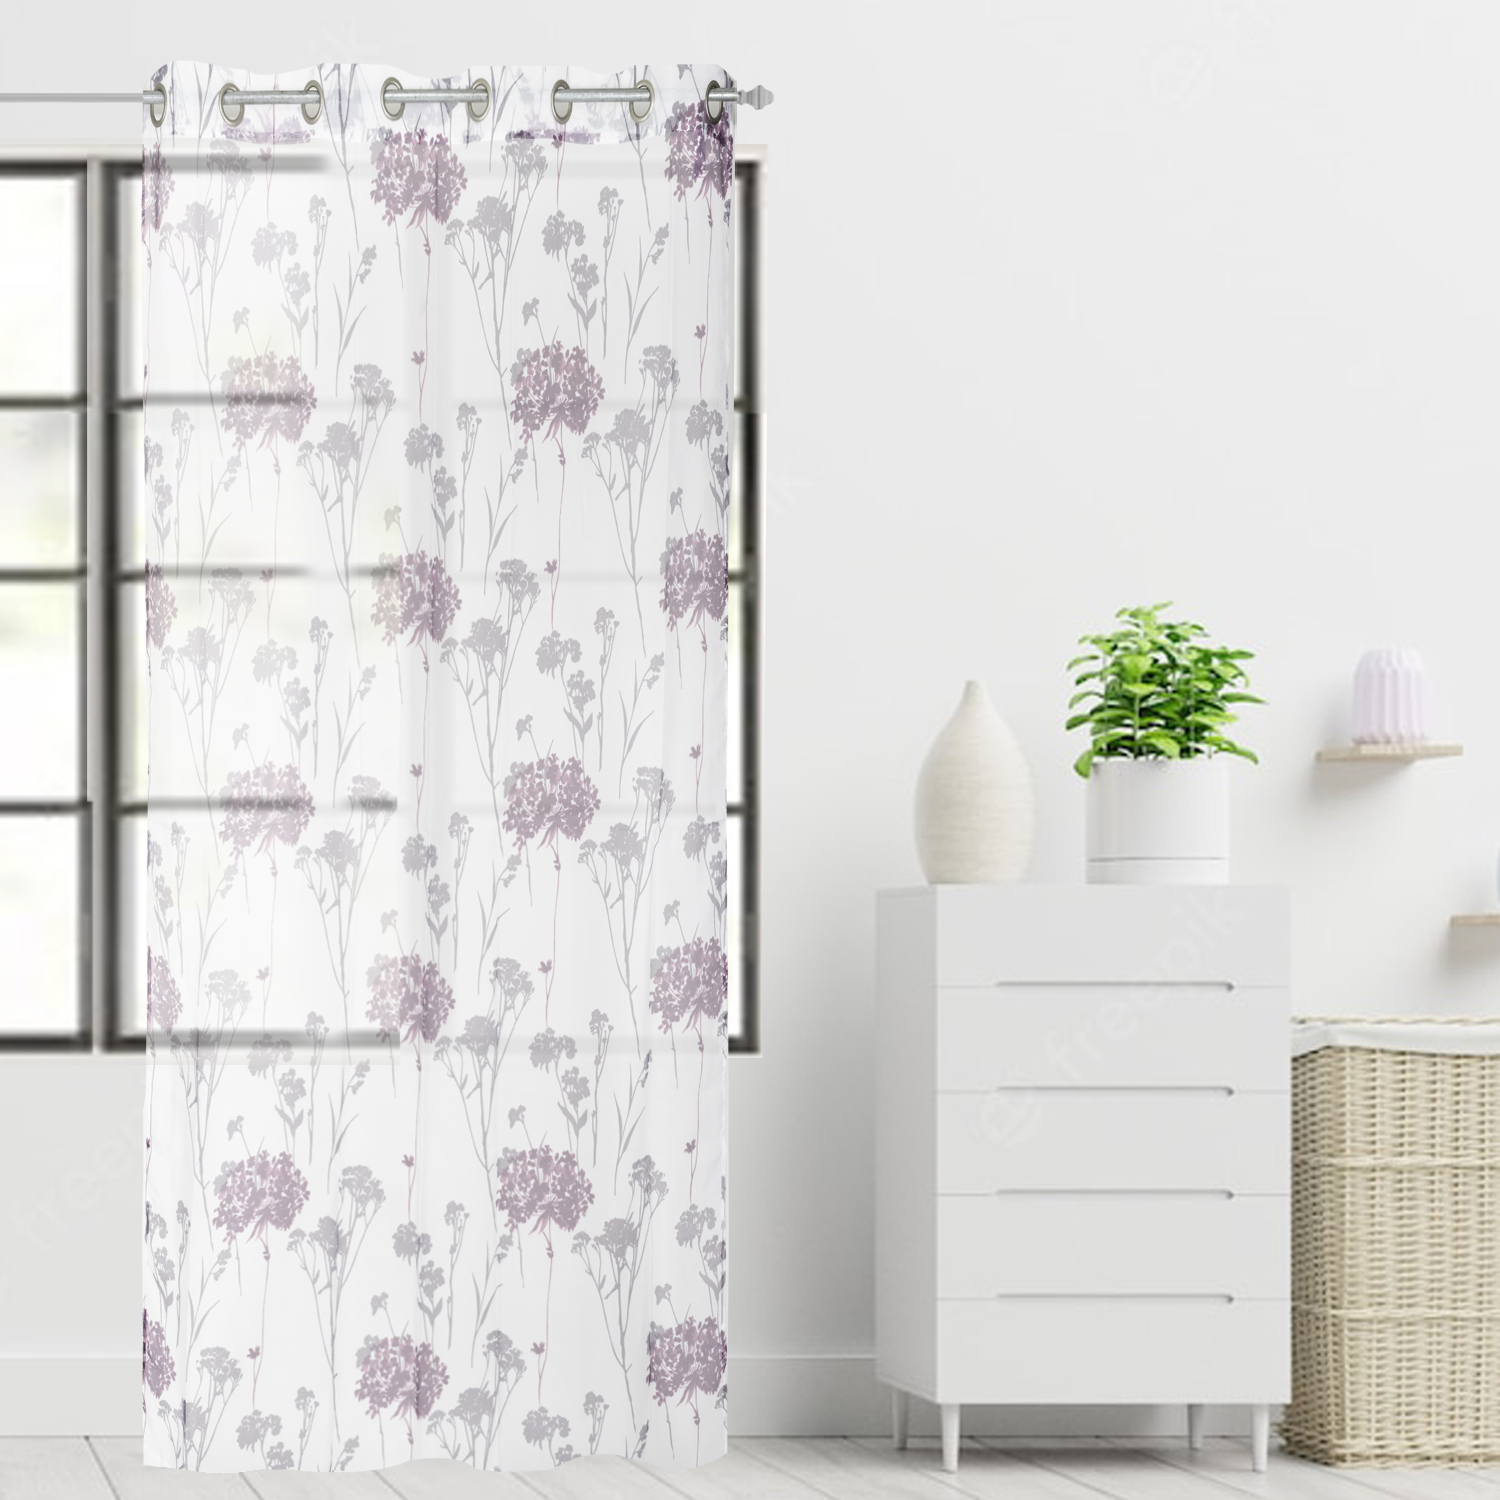 Sheer curtain panel with metal grommets, 54"x84" - Hydrangeas